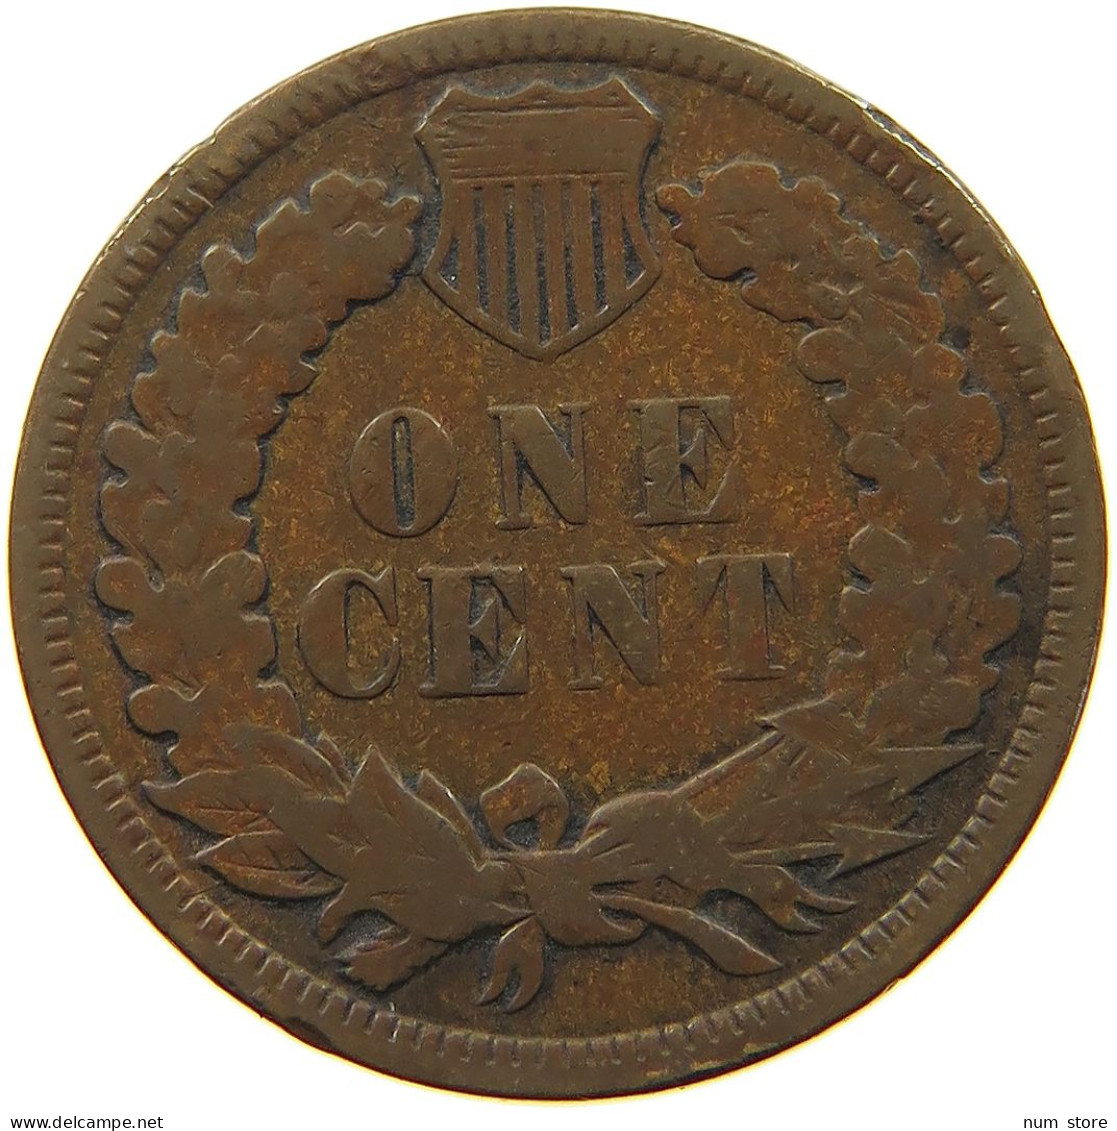 UNITED STATES OF AMERICA CENT 1892 INDIAN HEAD #a036 0693 - 1859-1909: Indian Head